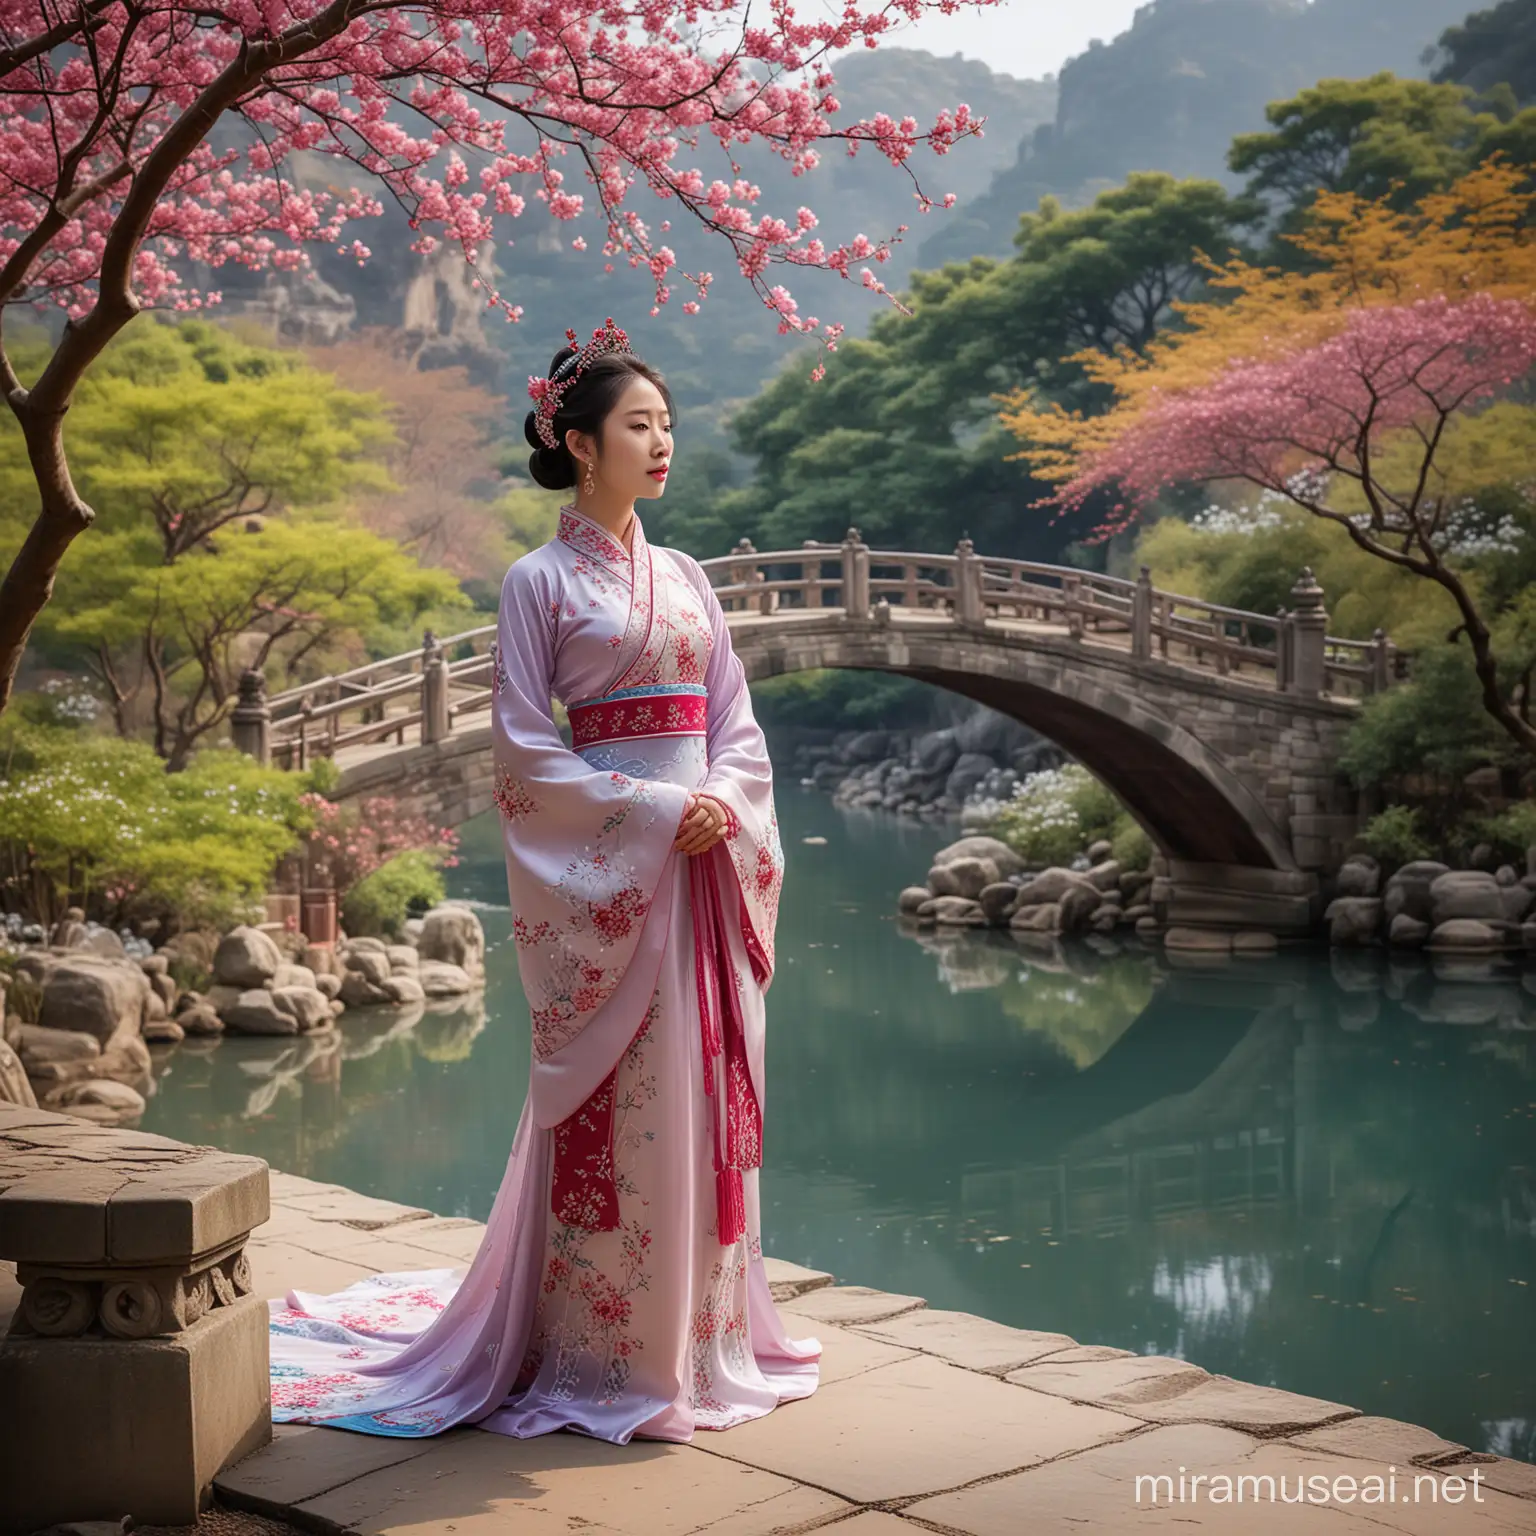 Elegant Princess in Traditional Chinese Dress by Colorful Riverbank Garden